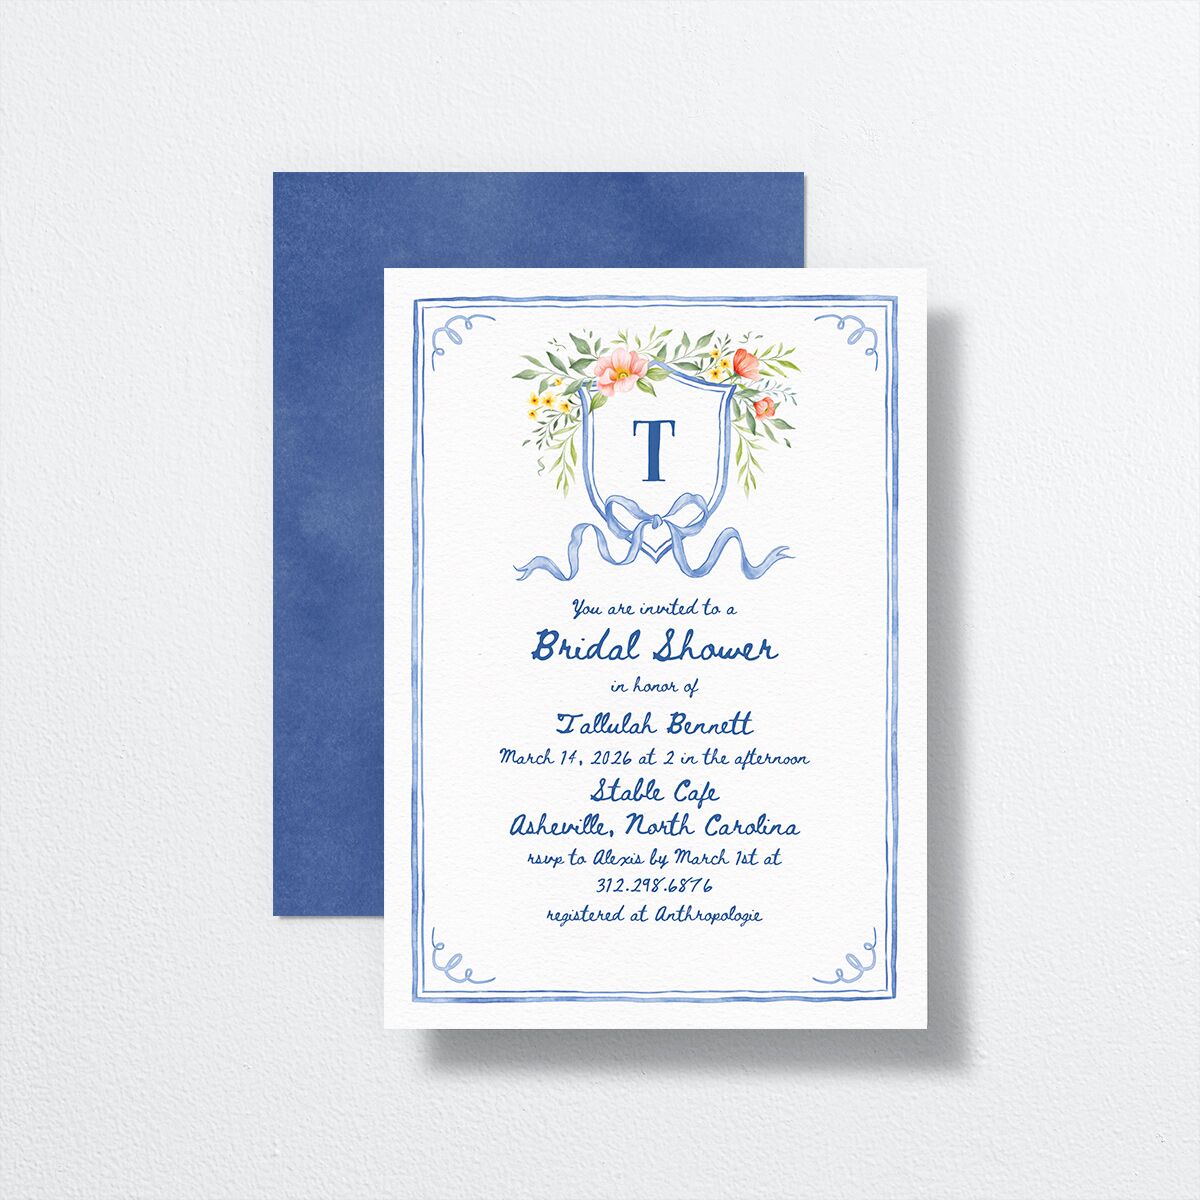 Countryside Crest Bridal Shower Invitations front-and-back